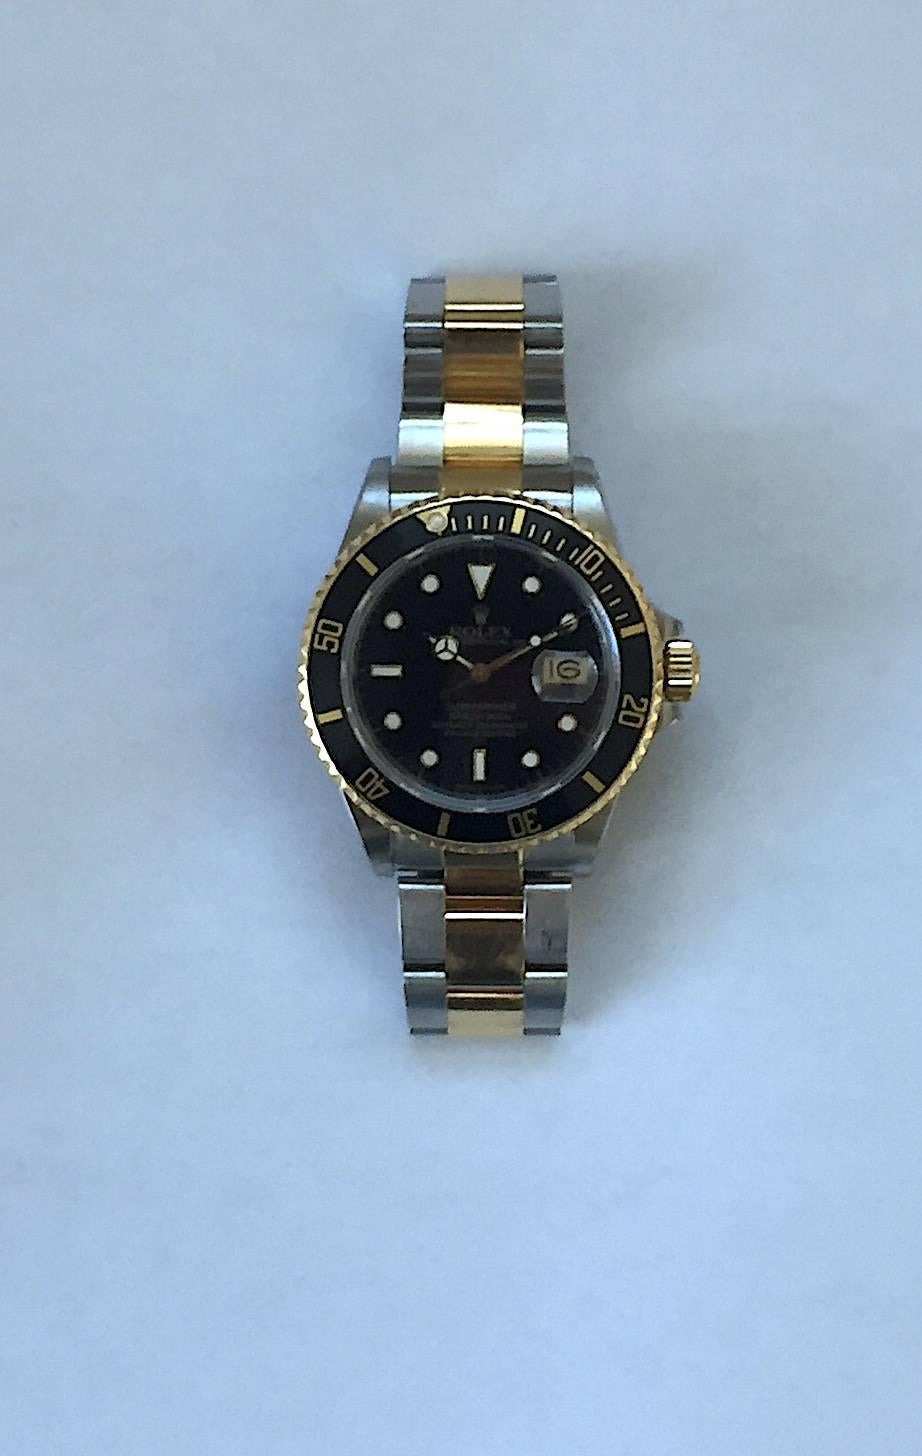 Rolex Stainless Steel and Yellow Gold Oyster Perpetual Submariner Watch
Factory Black Gloss Dial with Applied Hour Markers 
Yellow Gold Rotating Bezel with Black and Gold Insert
40mm in Size
Comes Fitted on Original Rolex Steel and Gold Oyster